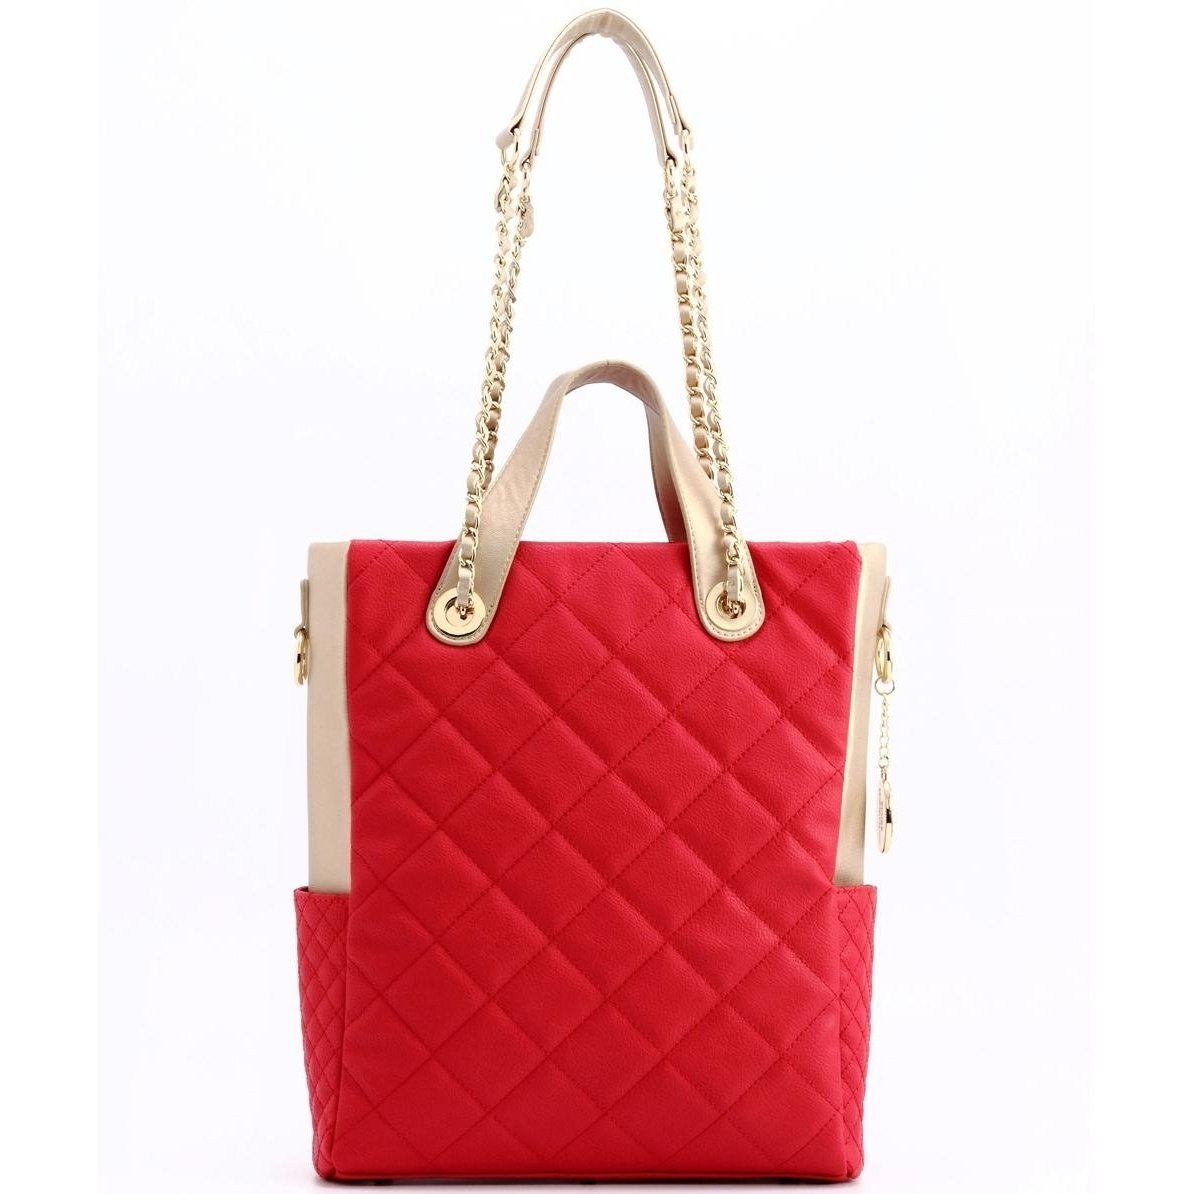 SCORE!'s Kat Travel Tote For Business, Work, Or School Quilted Shoulder Bag Red & Gold